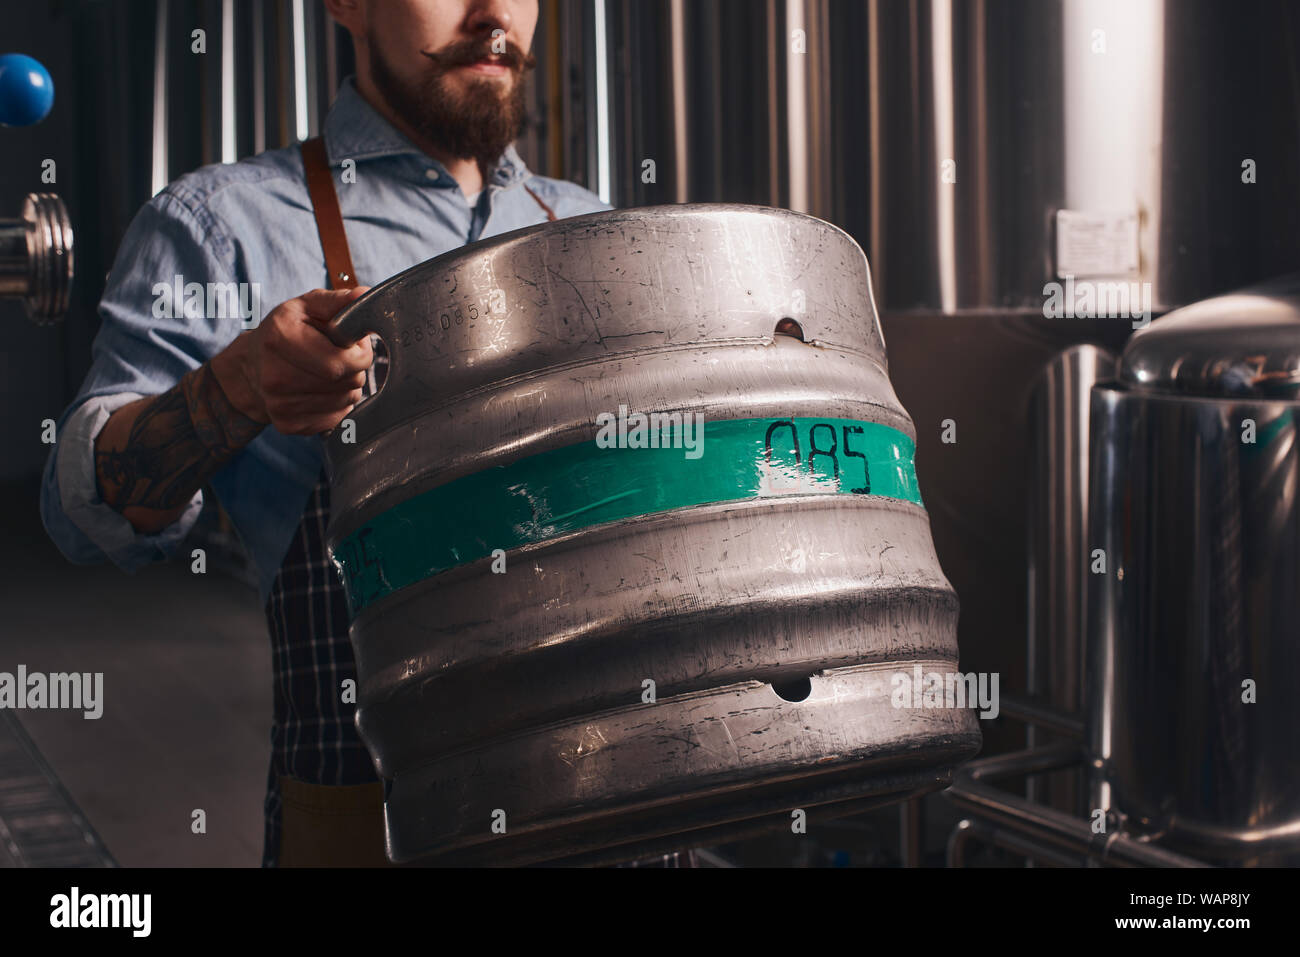 Brewery worker adds more beer to the bigger barrel from smaller one he holds and it looks like it is really difficult job to do. Stock Photo